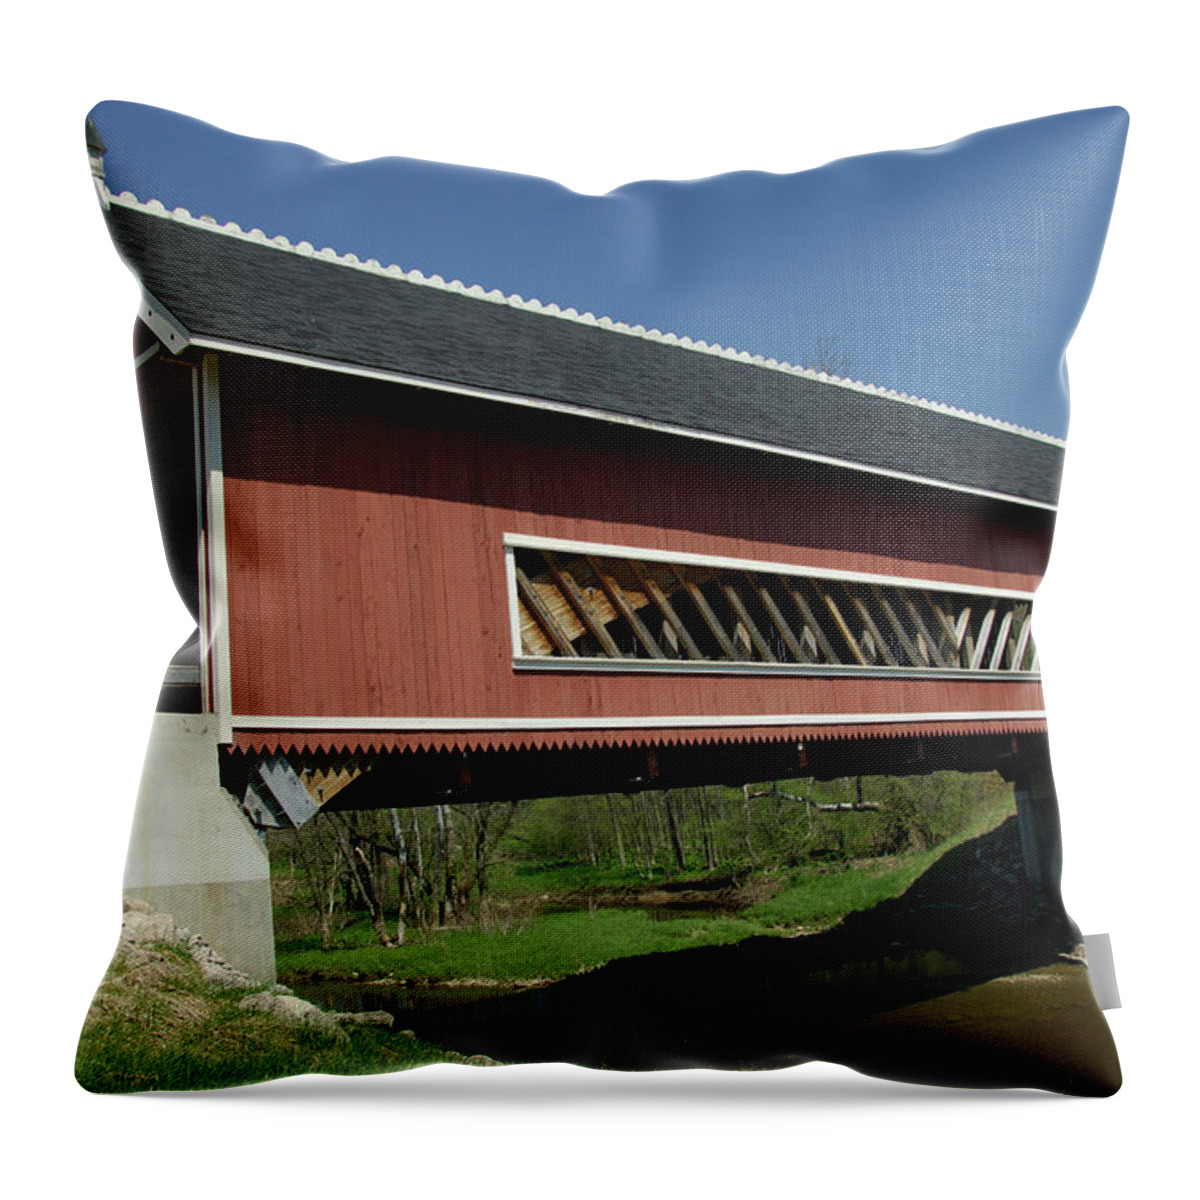 Covered Bridge Throw Pillow featuring the photograph Netcher Road Bridge by Norman Reid